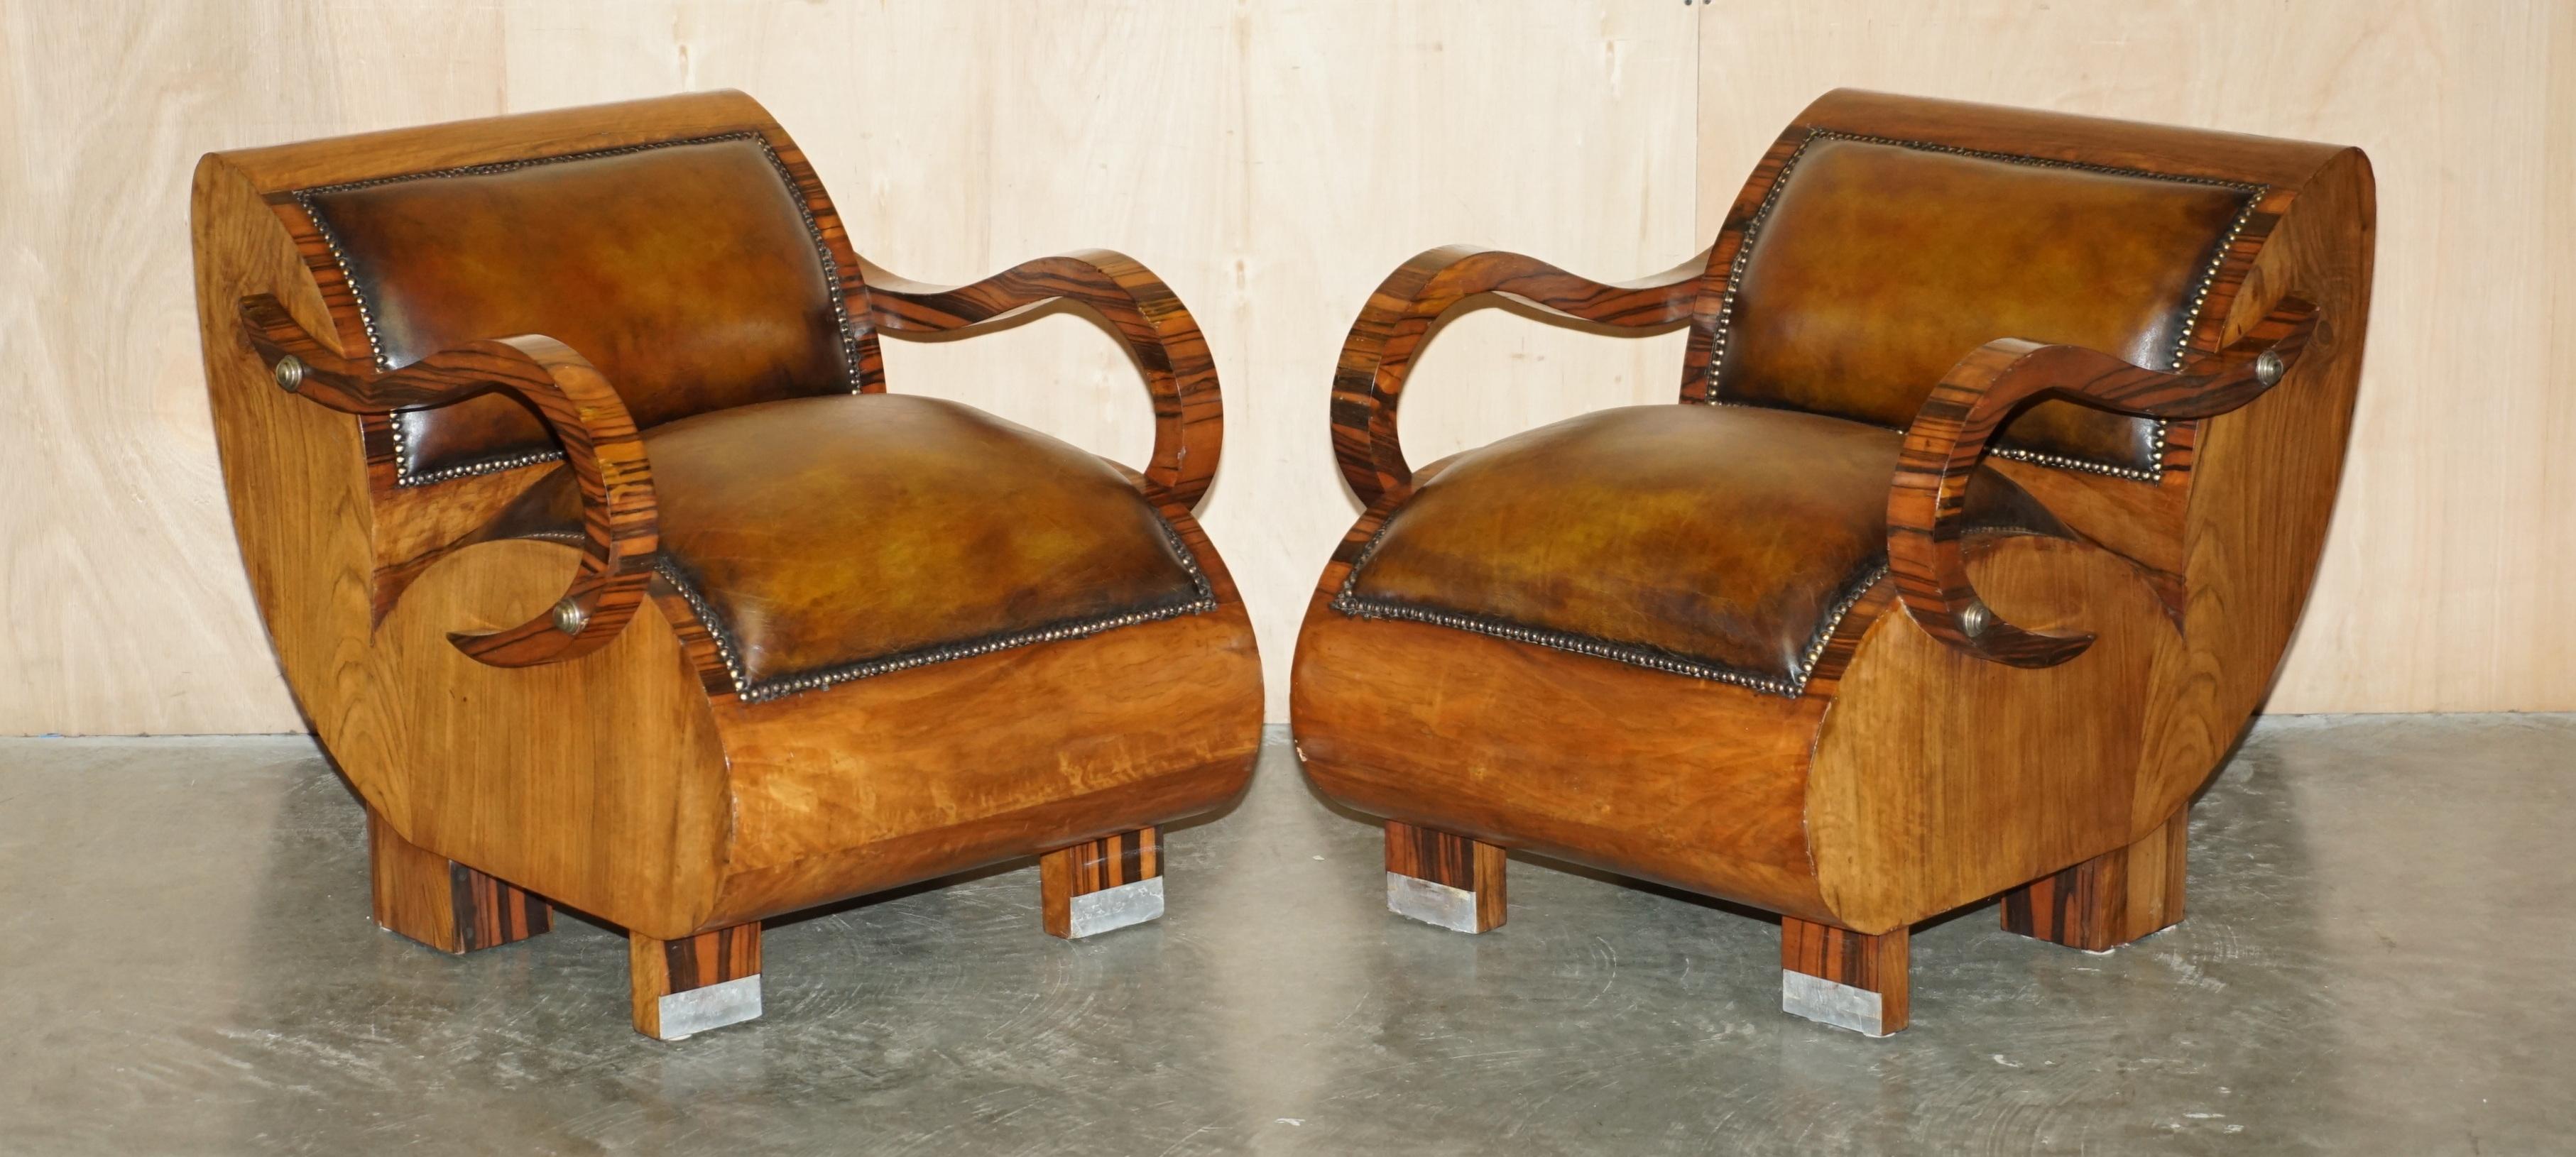 Royal House Antiques

Royal House Antiques is delighted to offer for sale this stunning, fully restored Art Deco circa 1920's hand dyed Cigar Brown leather sofa and armchair suite with Zebrano wood frame and Italian Russet hide leather upholstery